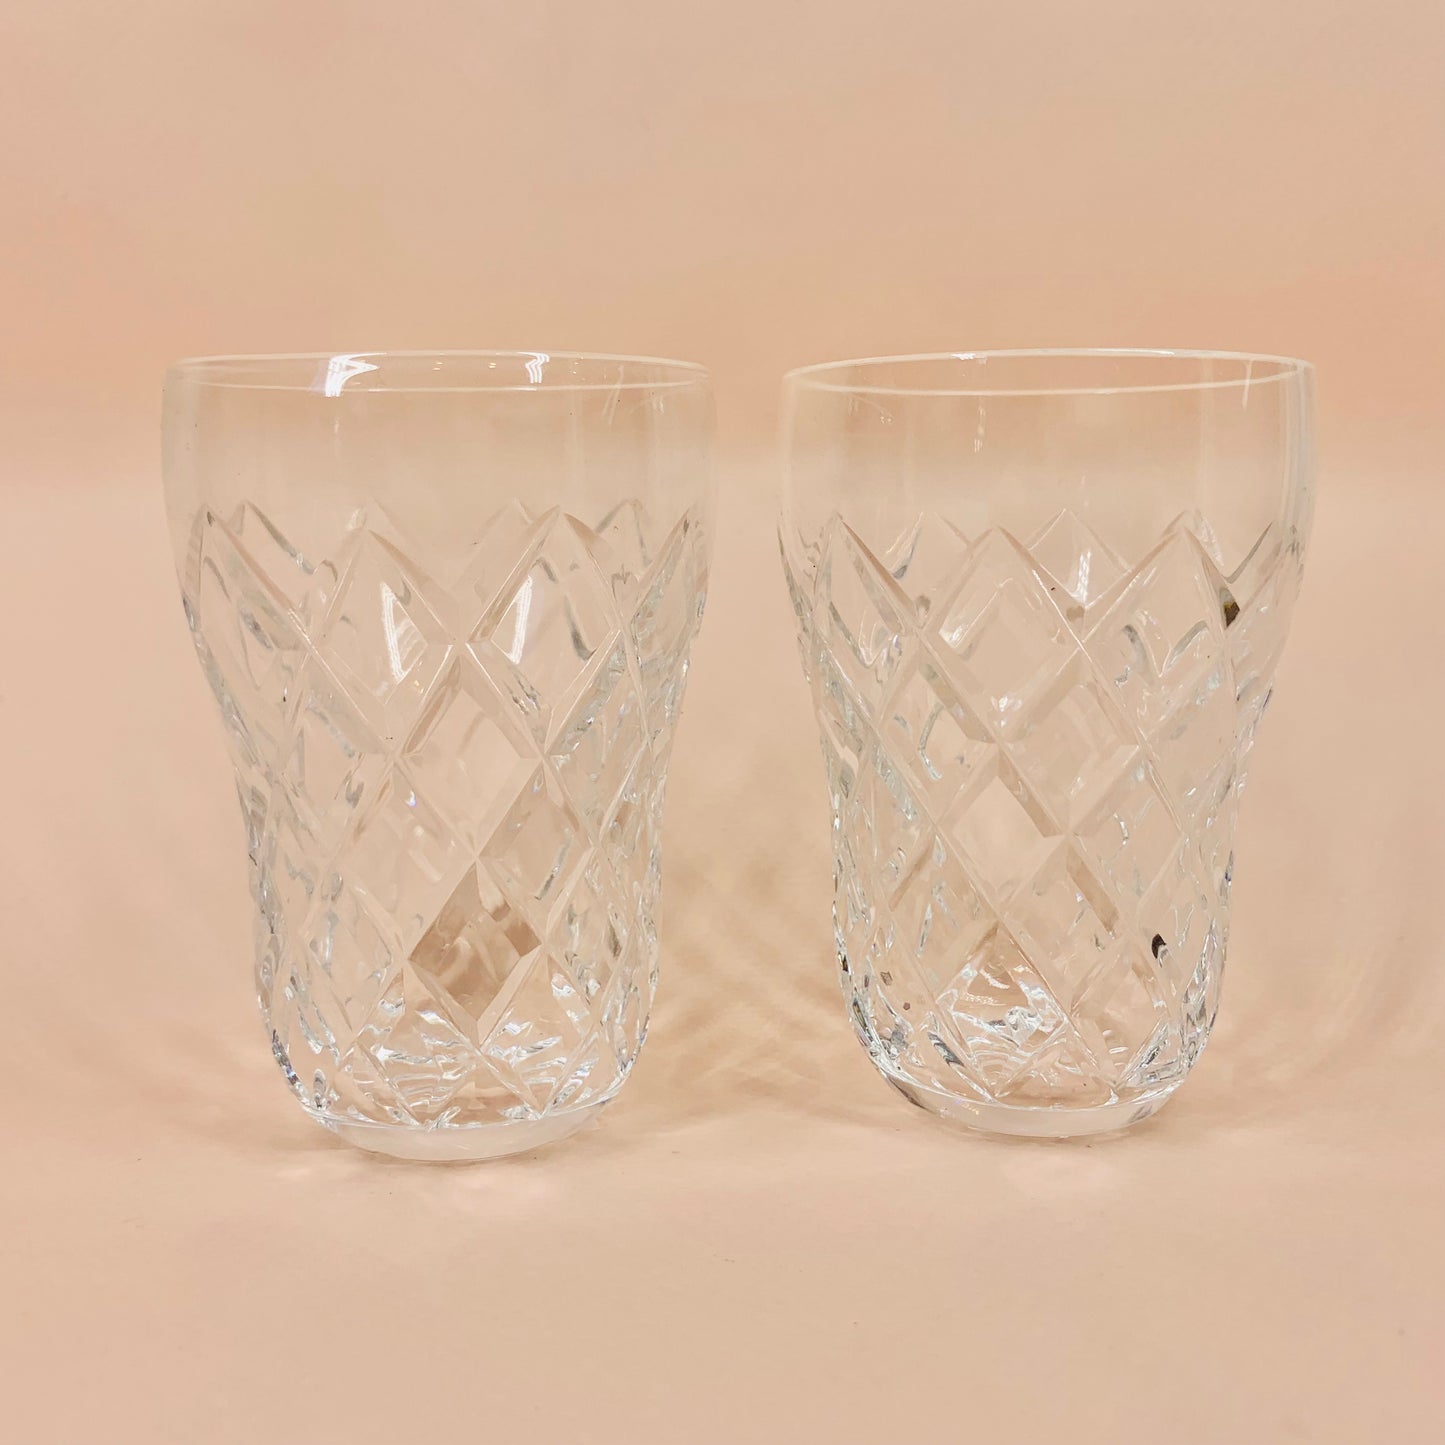 Antique Bohemian cut crystal short water tumblers with narrow base